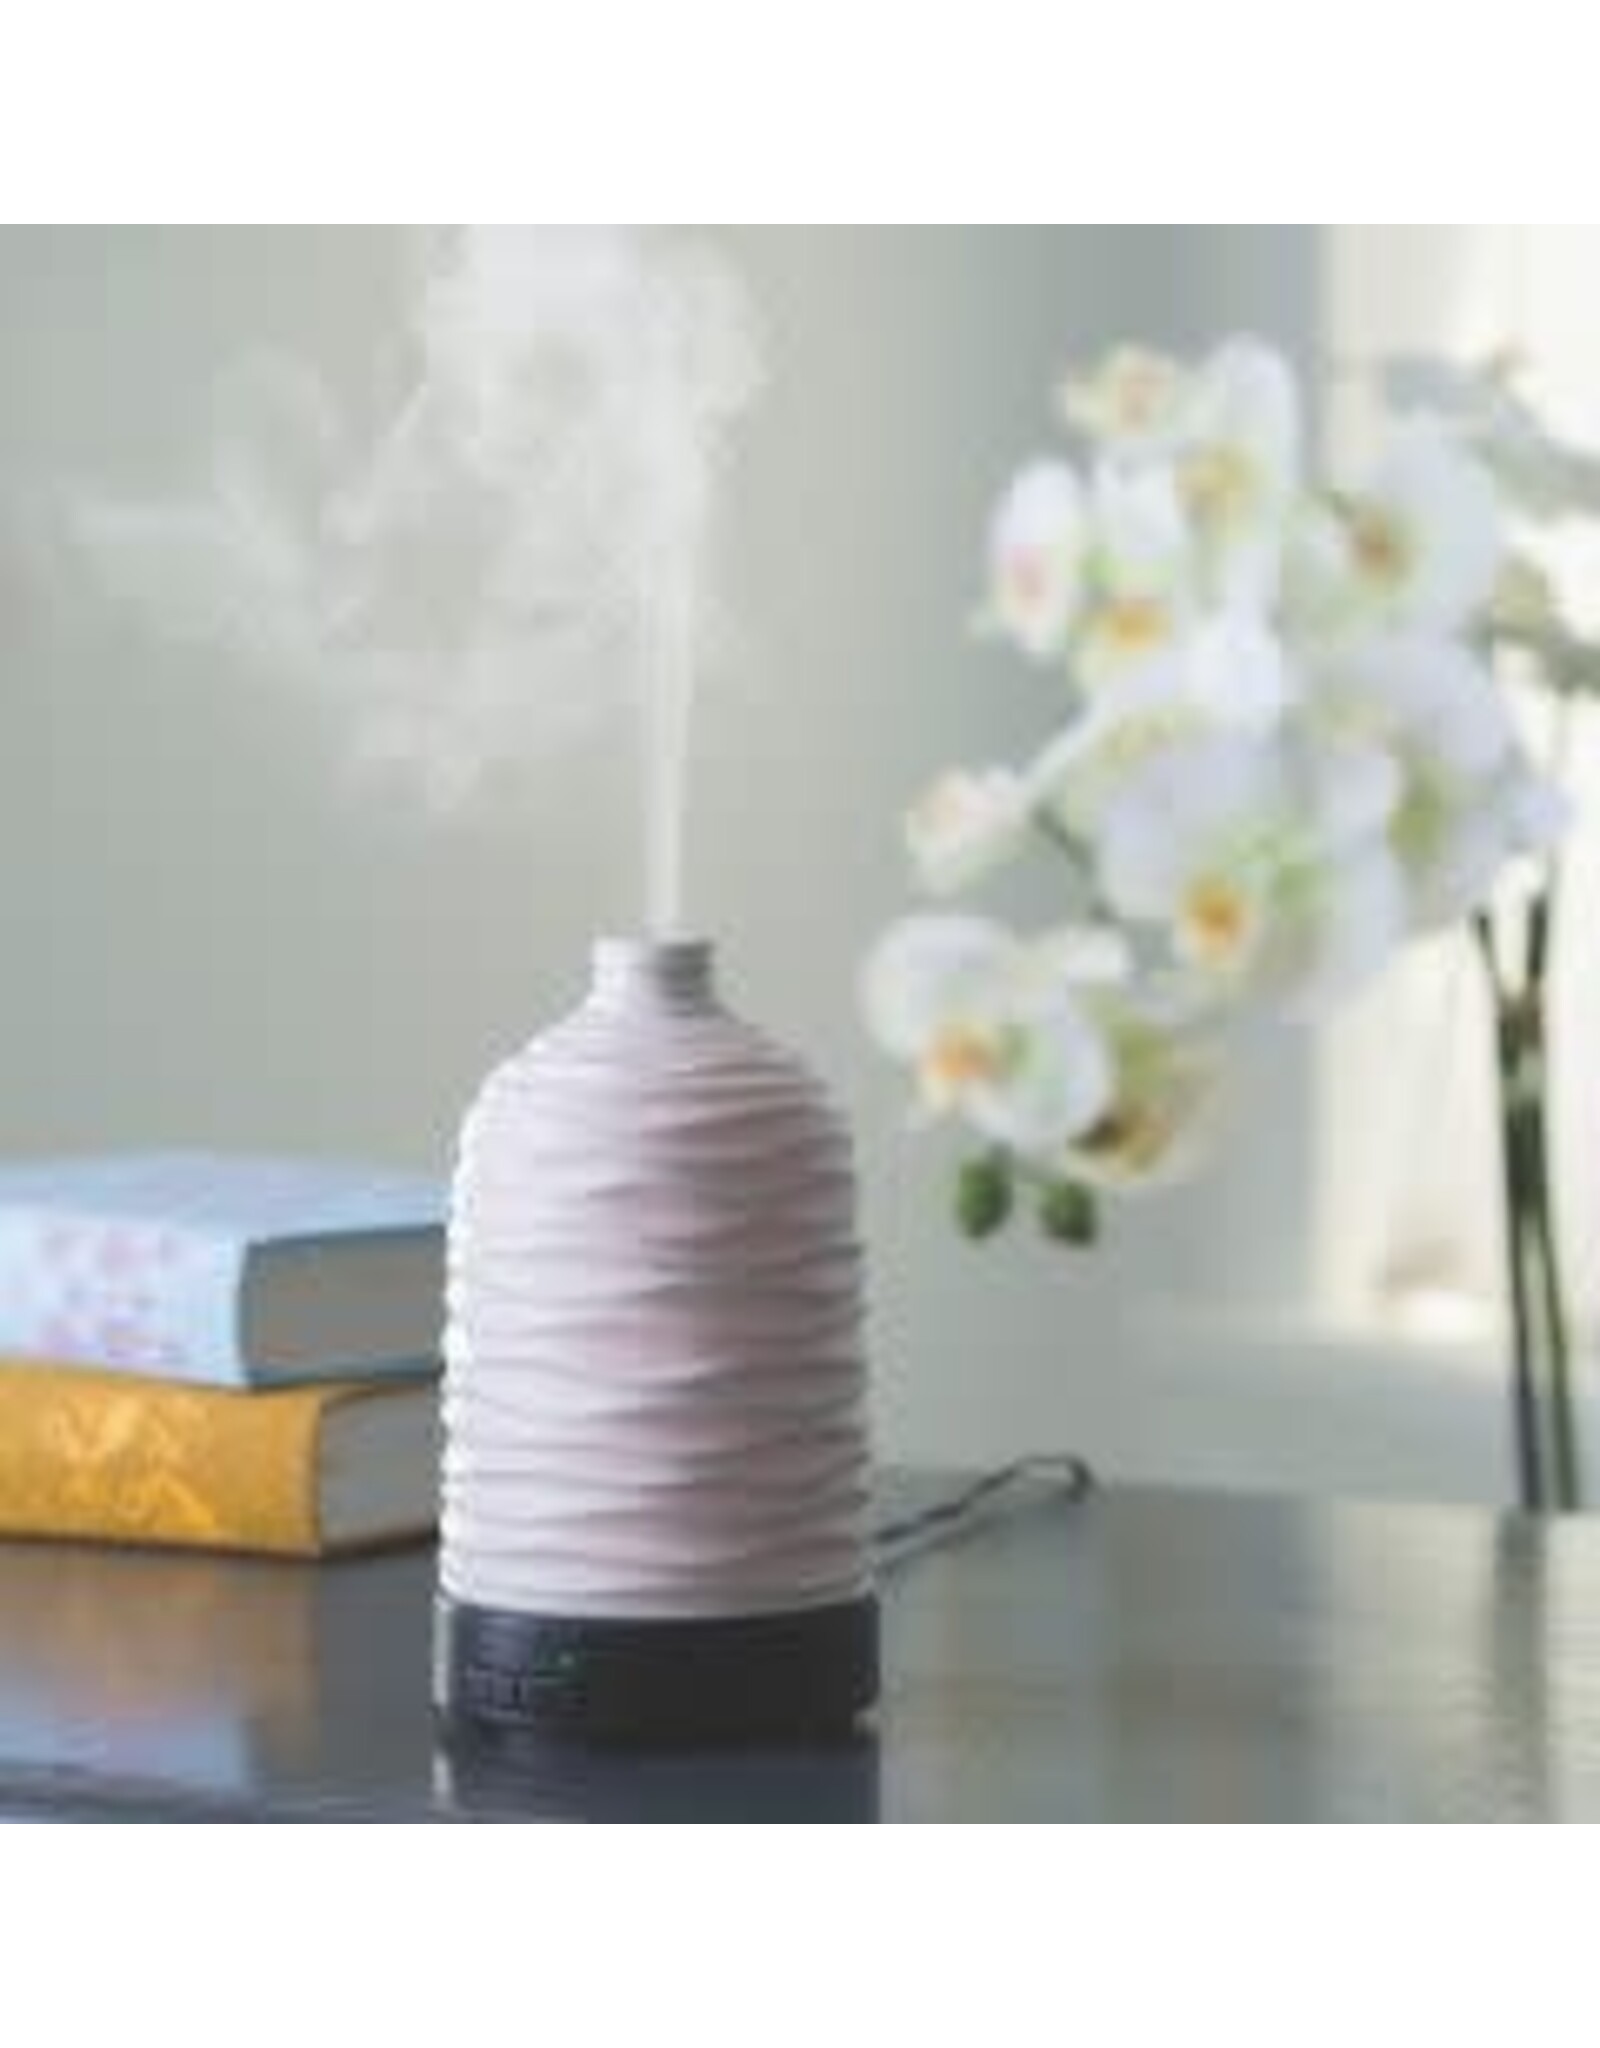 SDHMY Ultra Sonic Essential Oil Diffuser Harmony